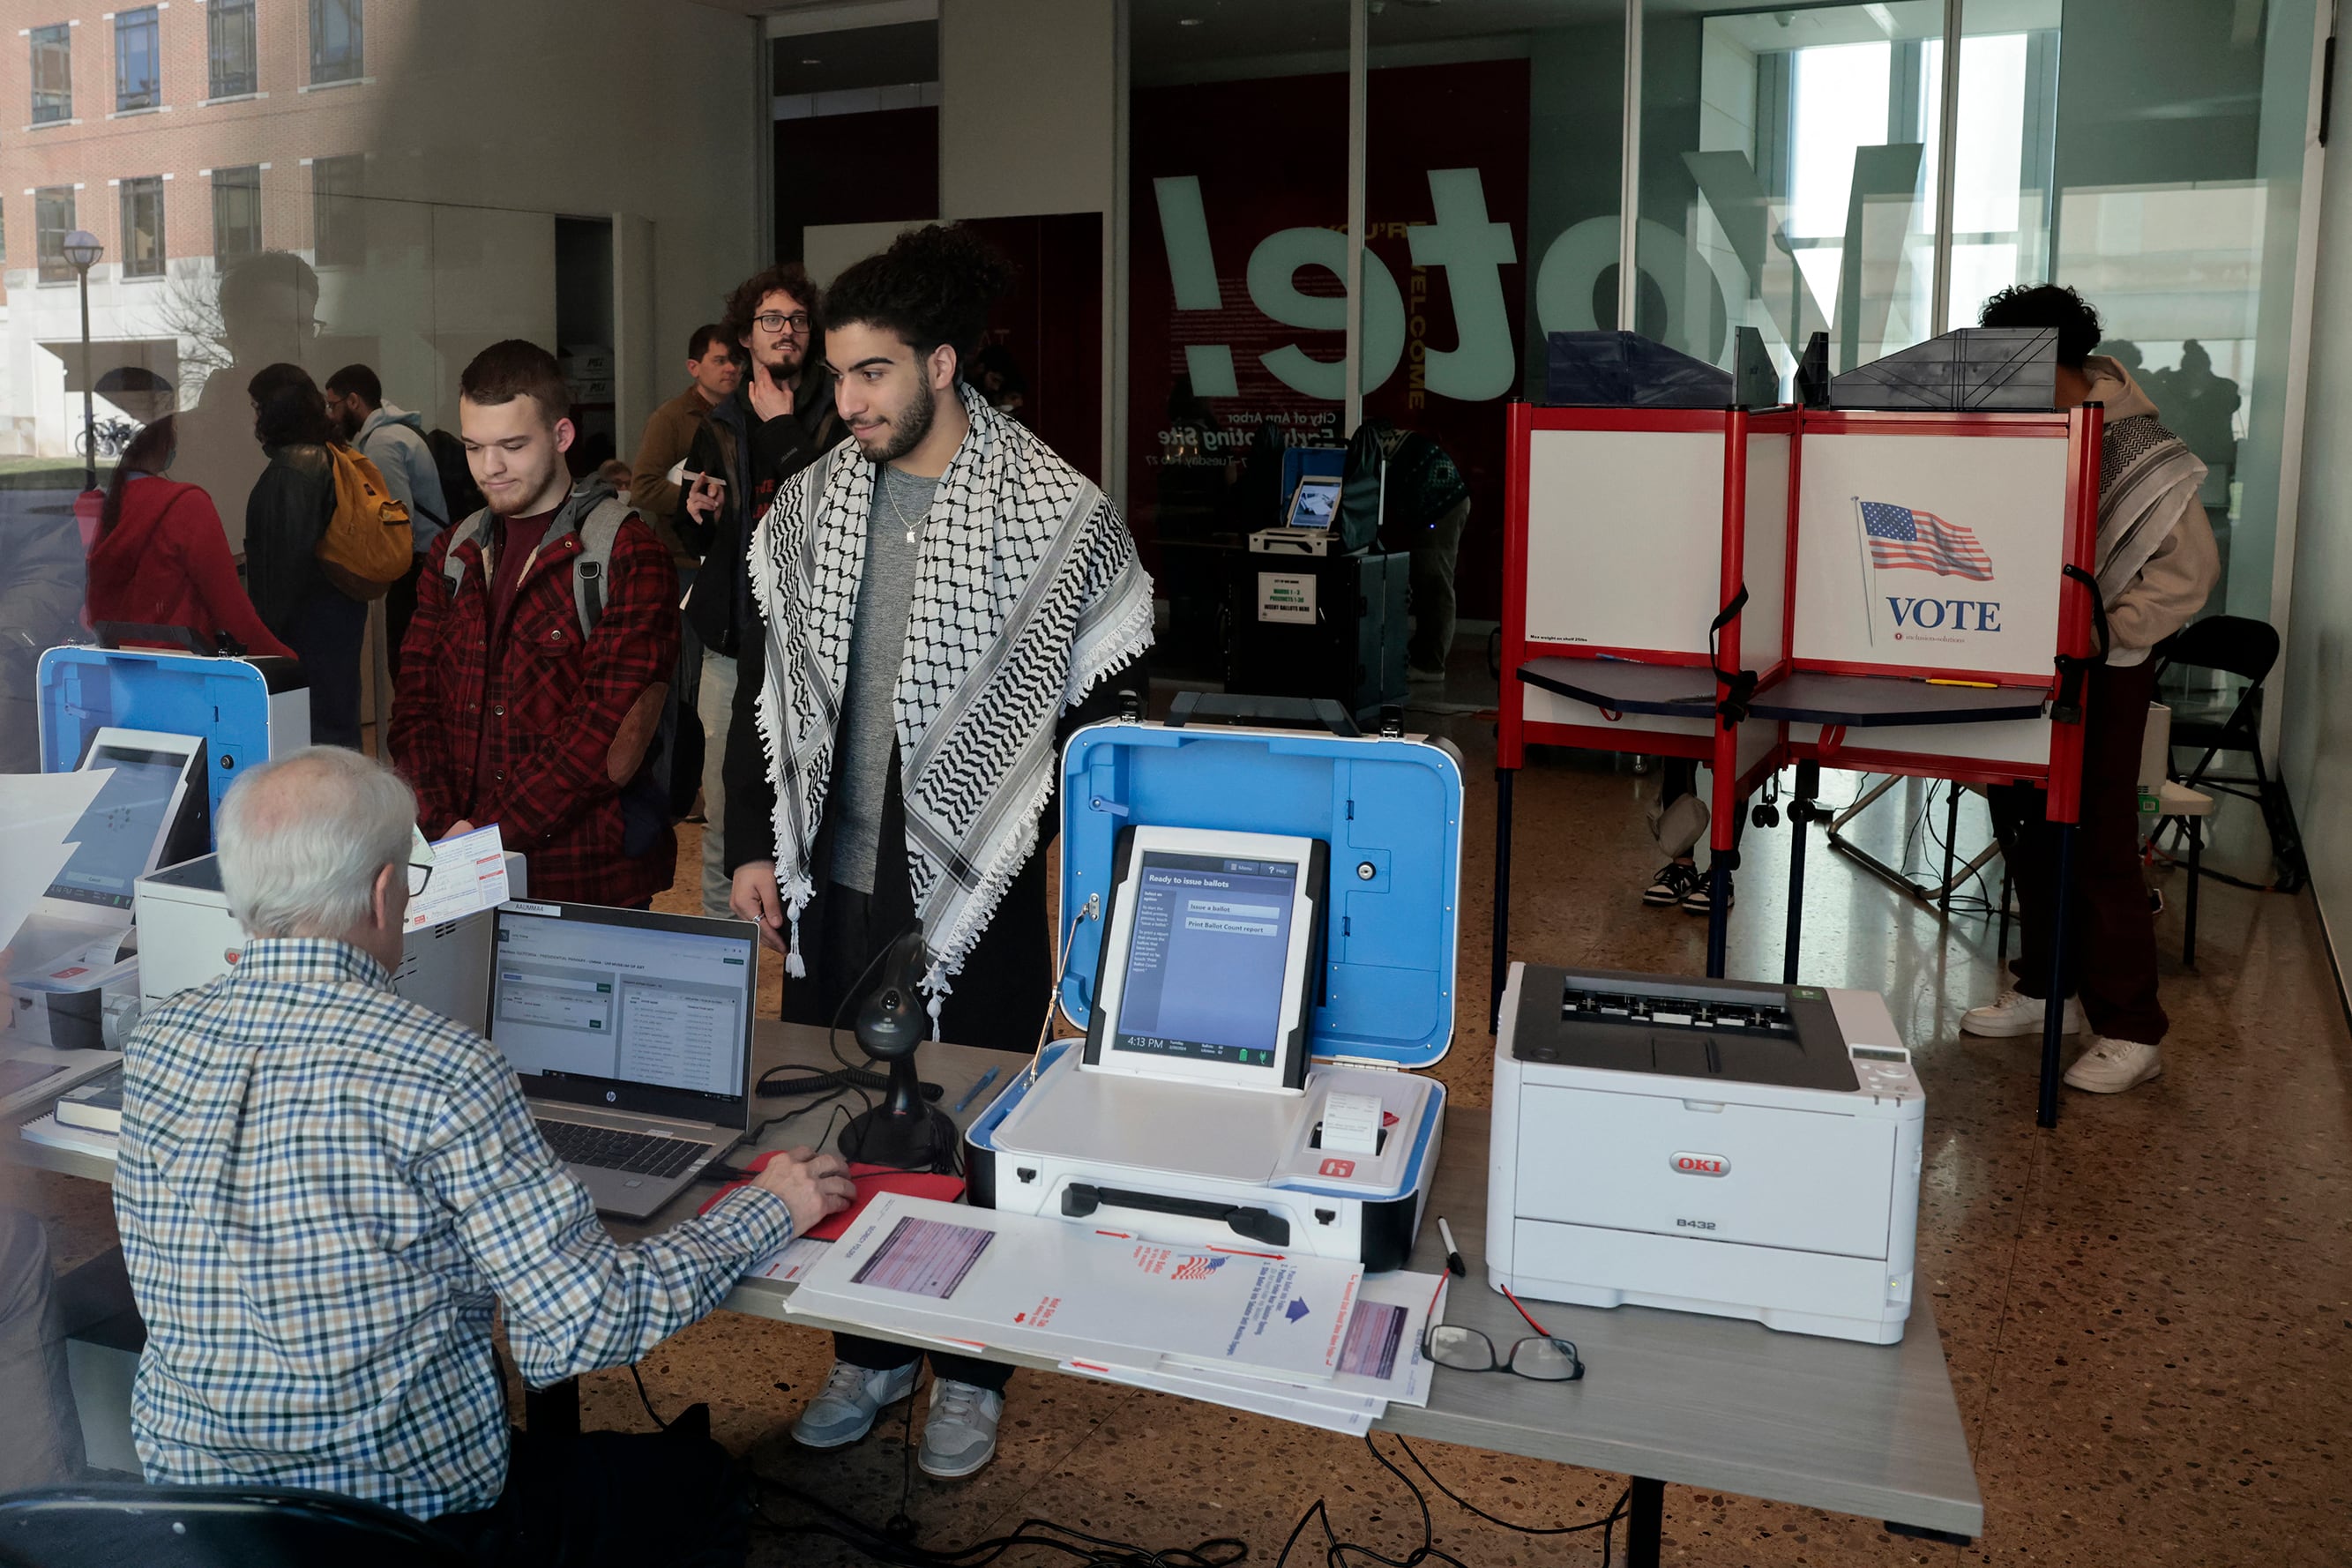 Two people stand in front of a desk with voting equipment and a person sitting at the desk. one person is voting in the background.